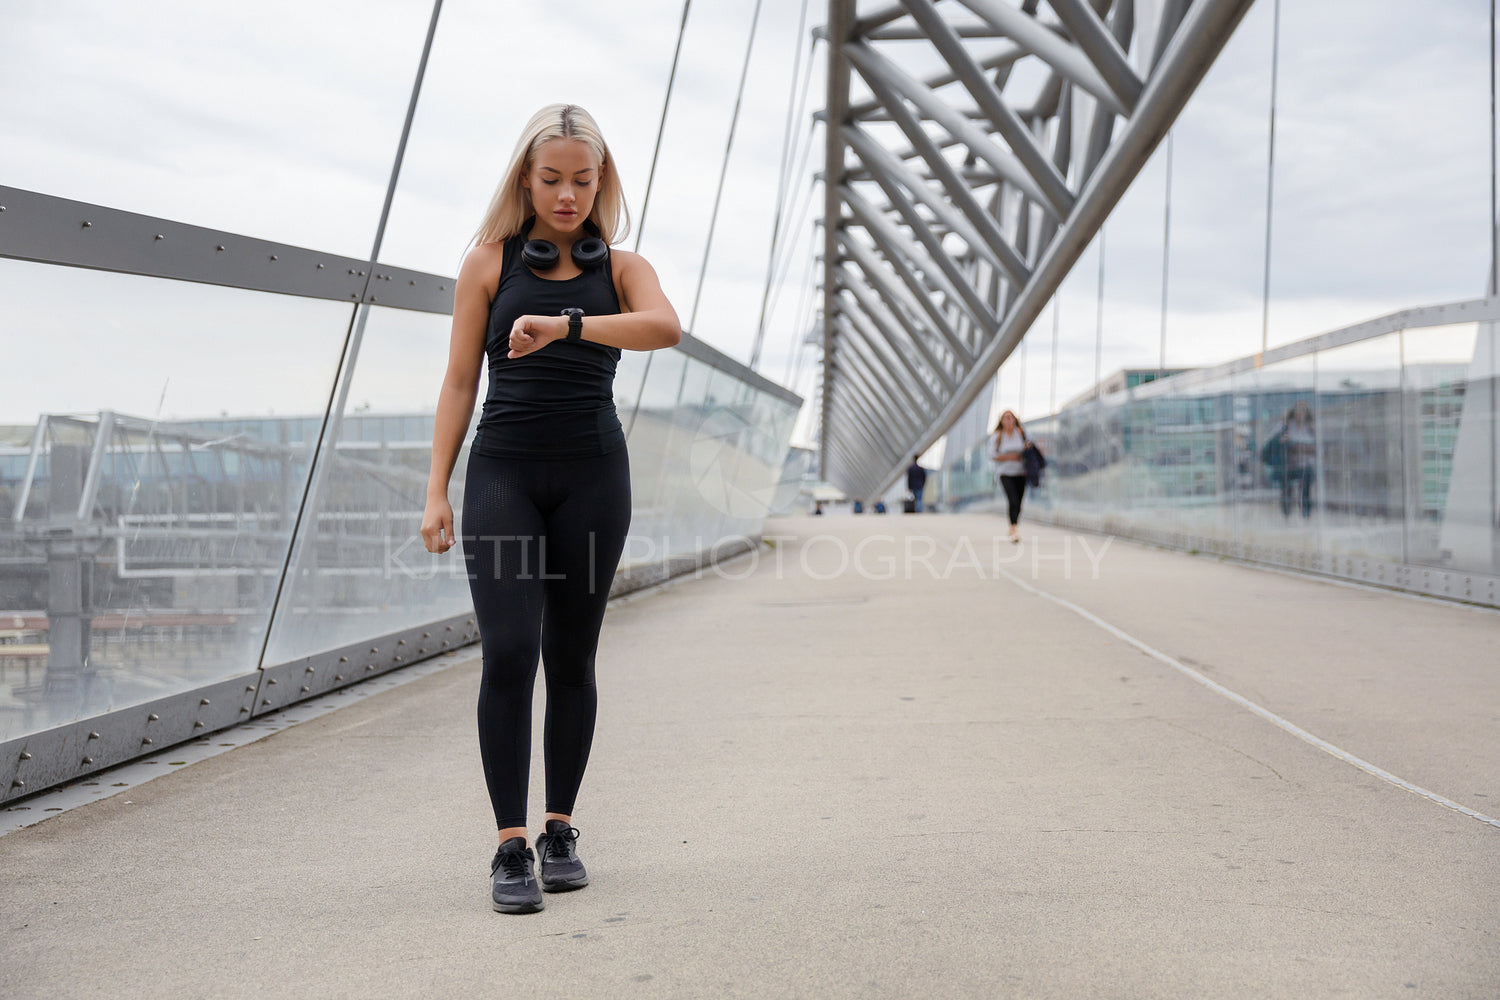 Walking Woman Checking Heart Rate Using Smartwatch After Workout